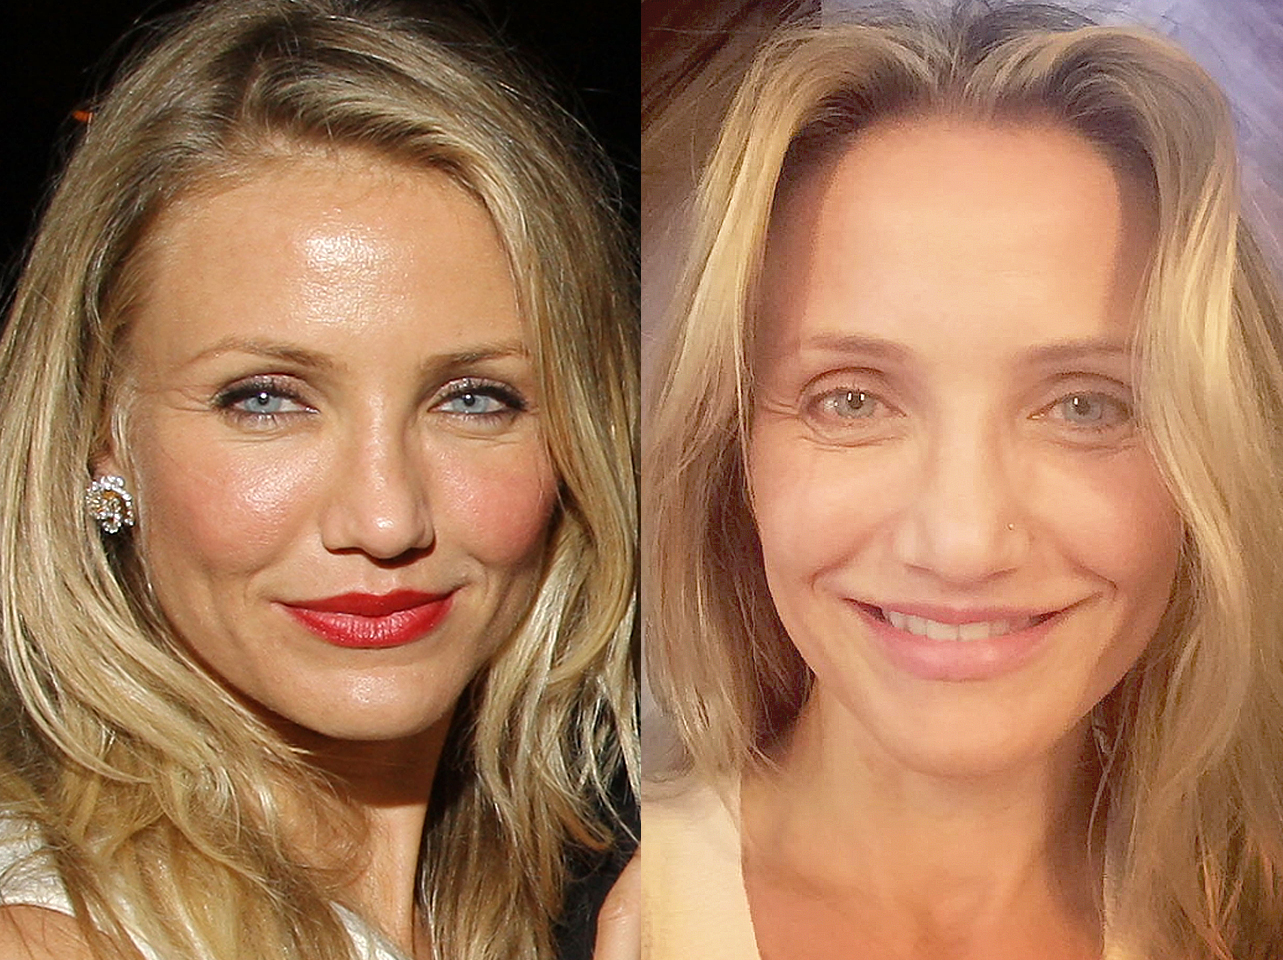 Cameron Diaz with makeup vs without makeup | Source: Getty Images | Instagram/camerondiaz